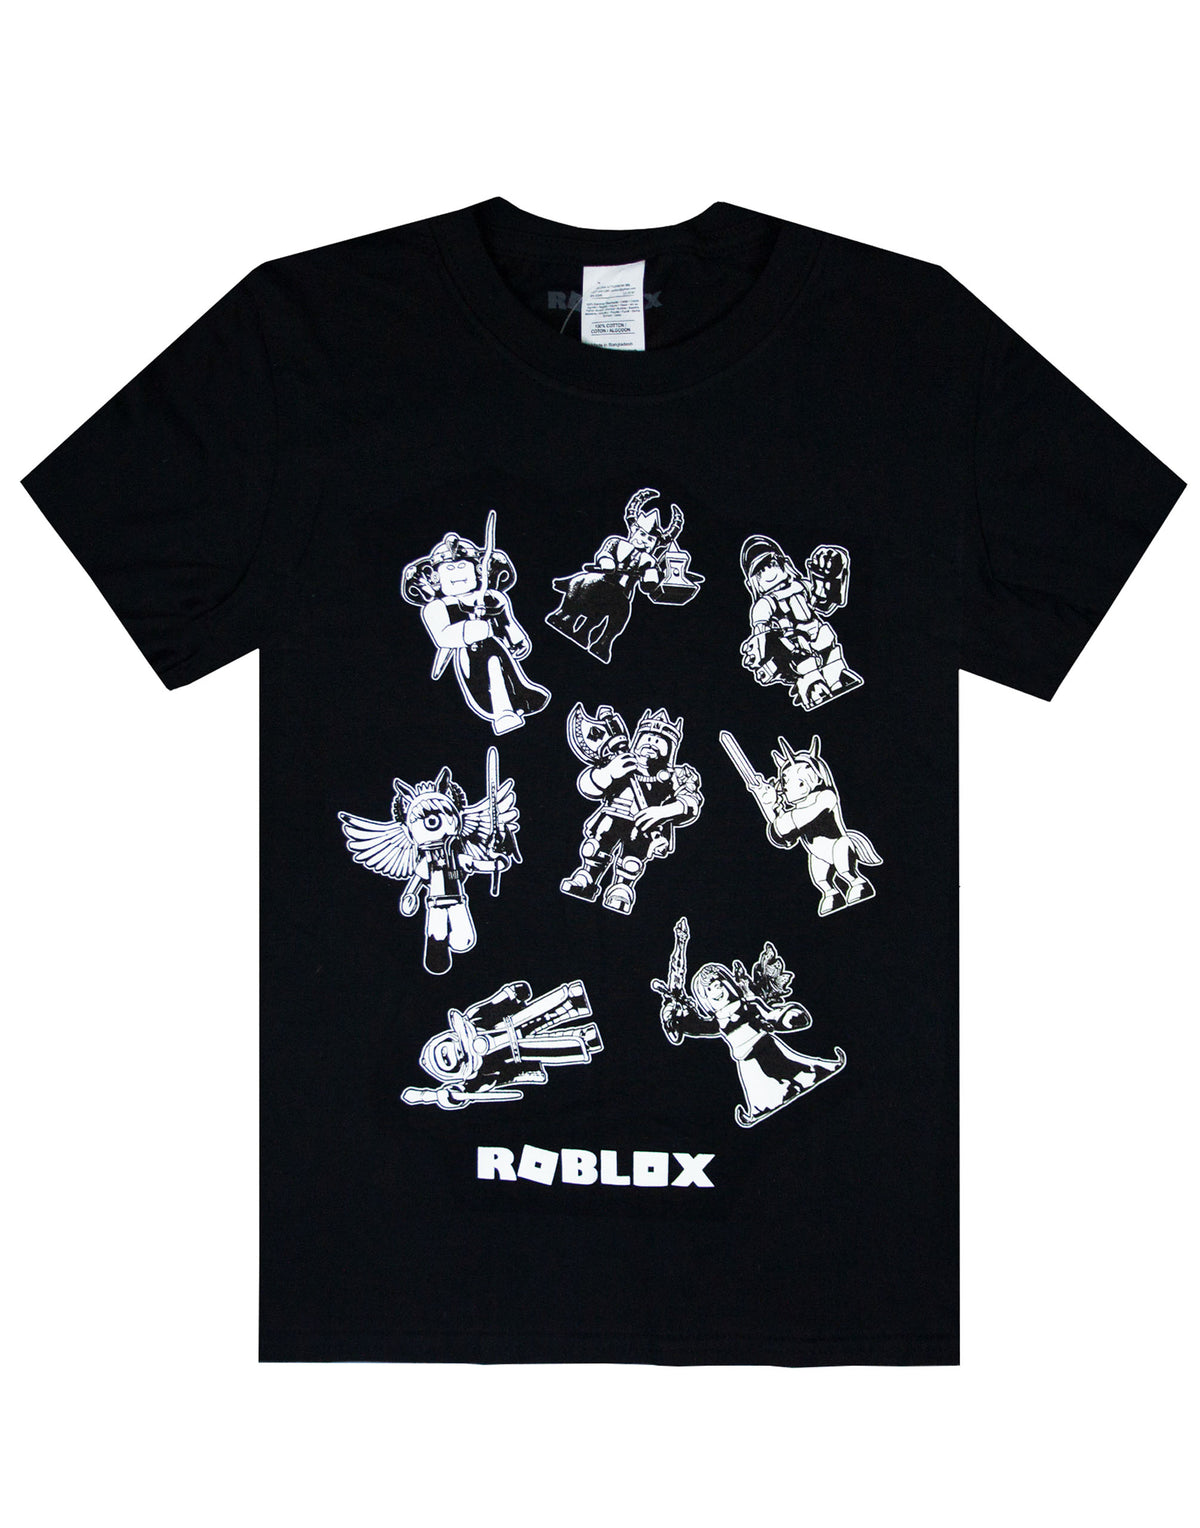 Roblox Characters In Space Kid S Black T Shirt Short Sleeve Gamer S Te Vanilla Underground - details about stardust ethical roblox kids childrens gaming with kev t shirt black